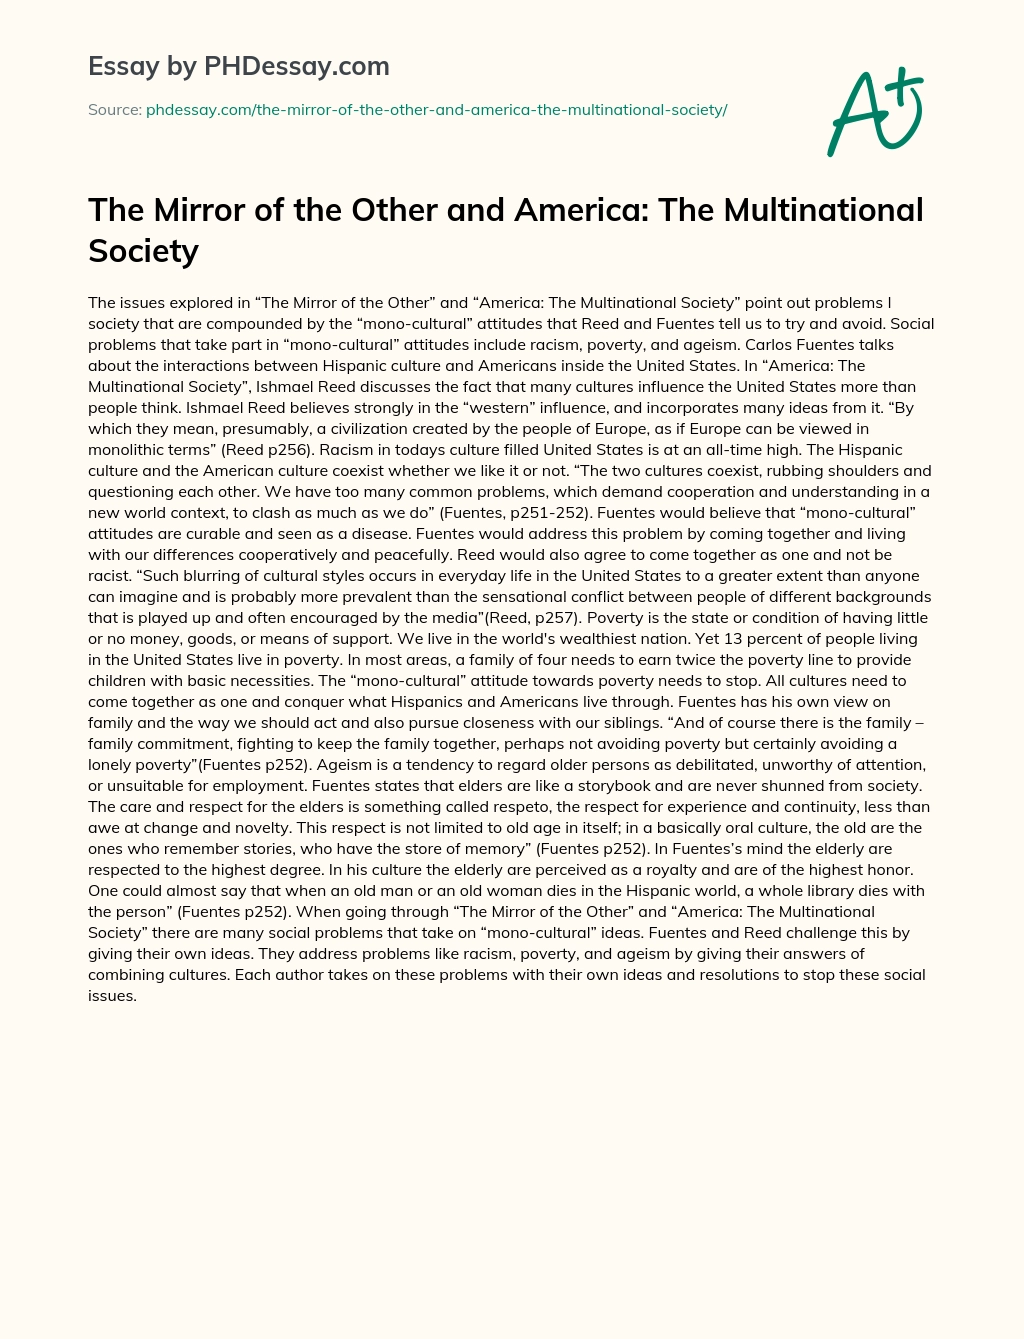 The Mirror of the Other and America: The Multinational Society essay